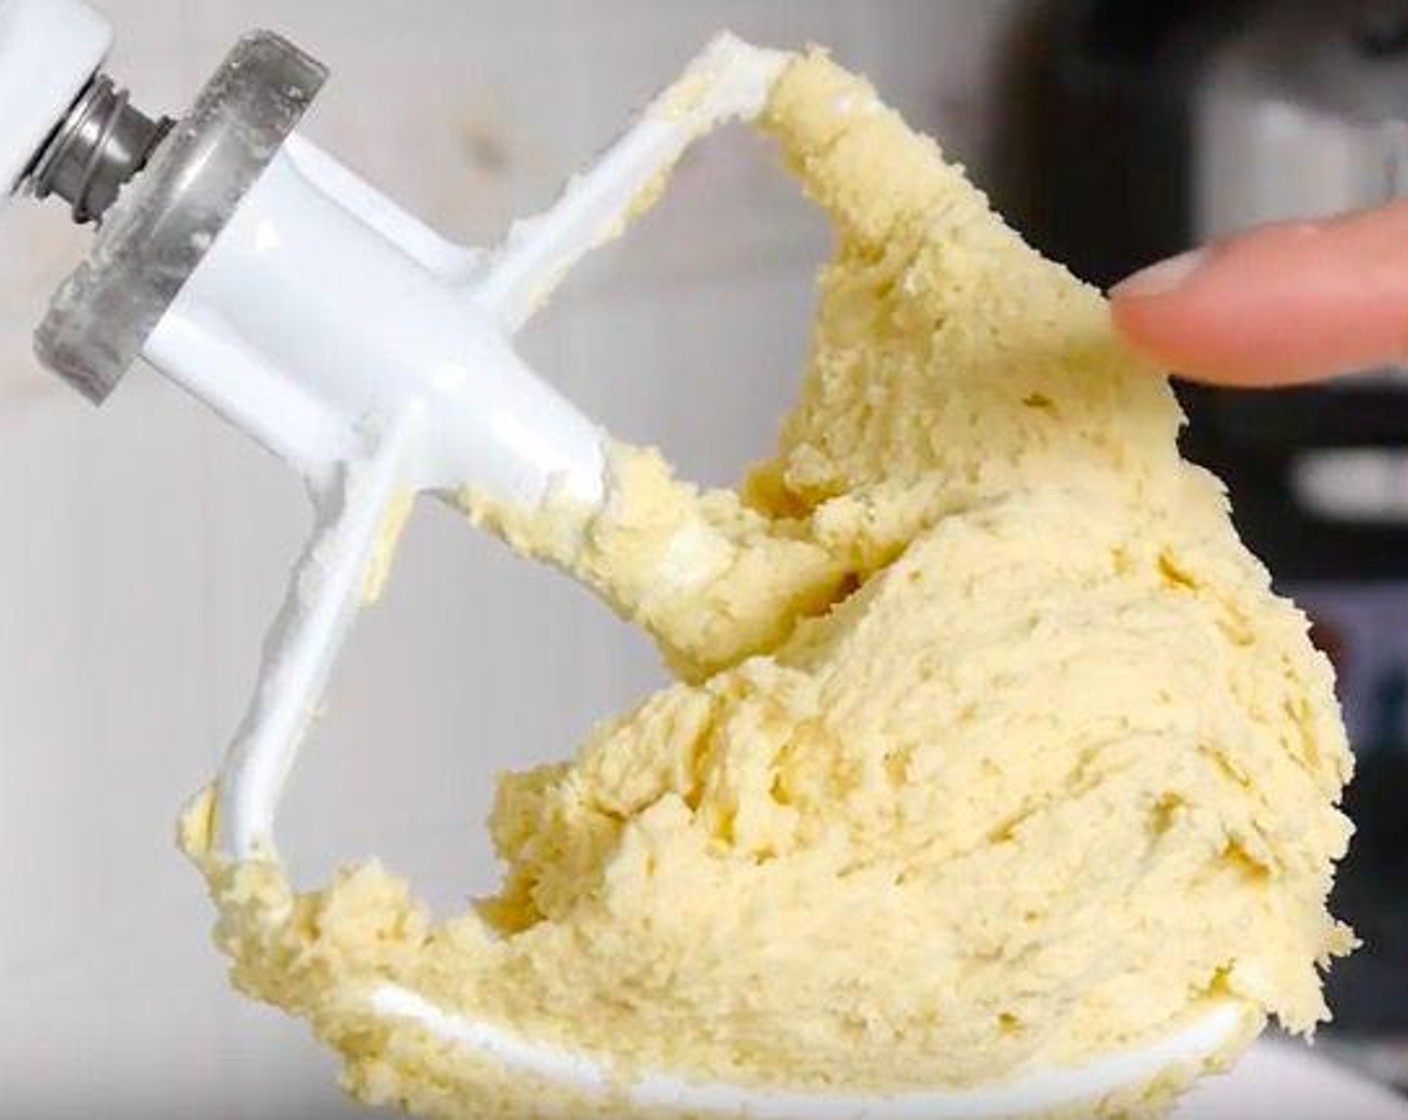 step 2 In a mixer or bowl soften the Unsalted Butter (1 cup). Add the Granulated Sugar (1/2 cup) and beat until it forms a soft cream. Add the Egg (1) and mix until all has combined.